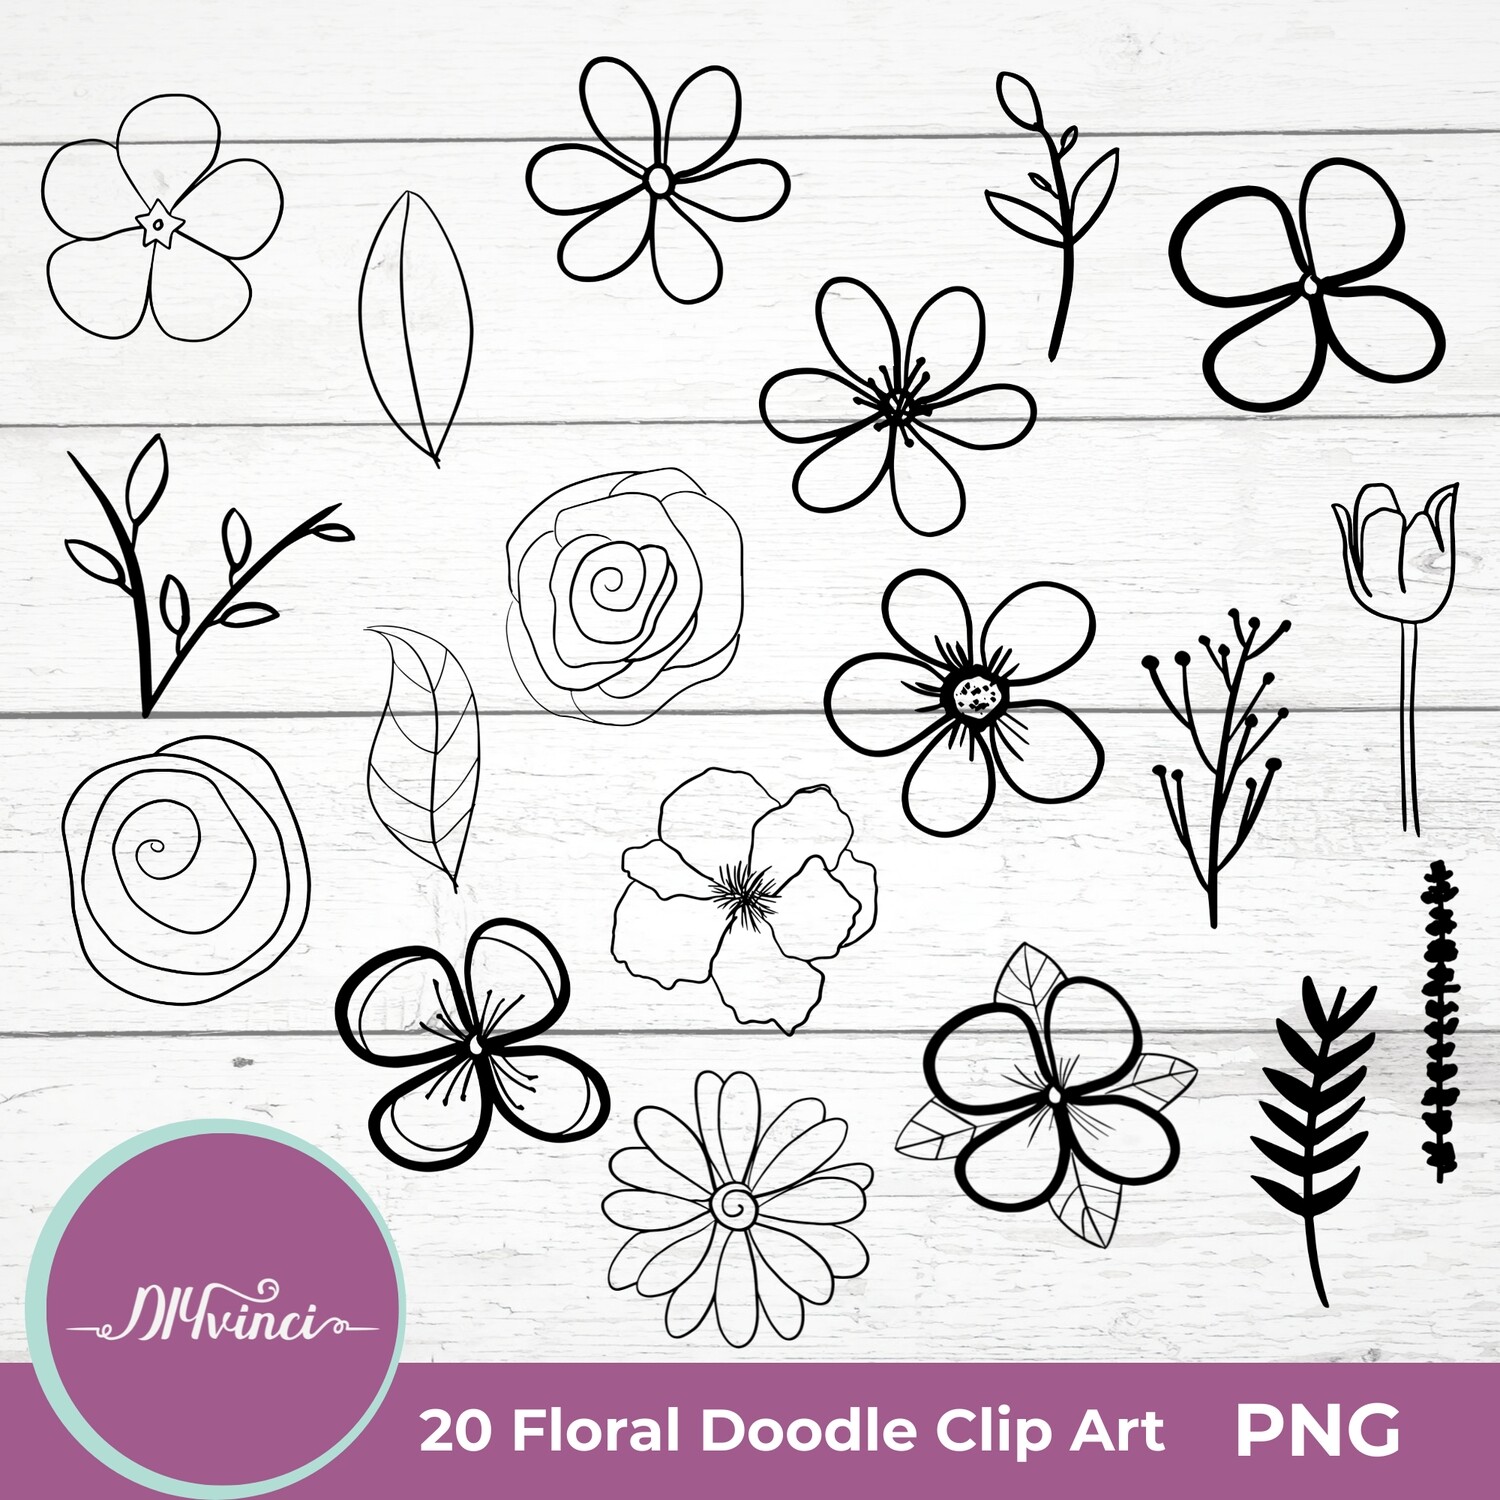 Floral Doodle Clip Art - 20 PNG - Personal & Commercial Use